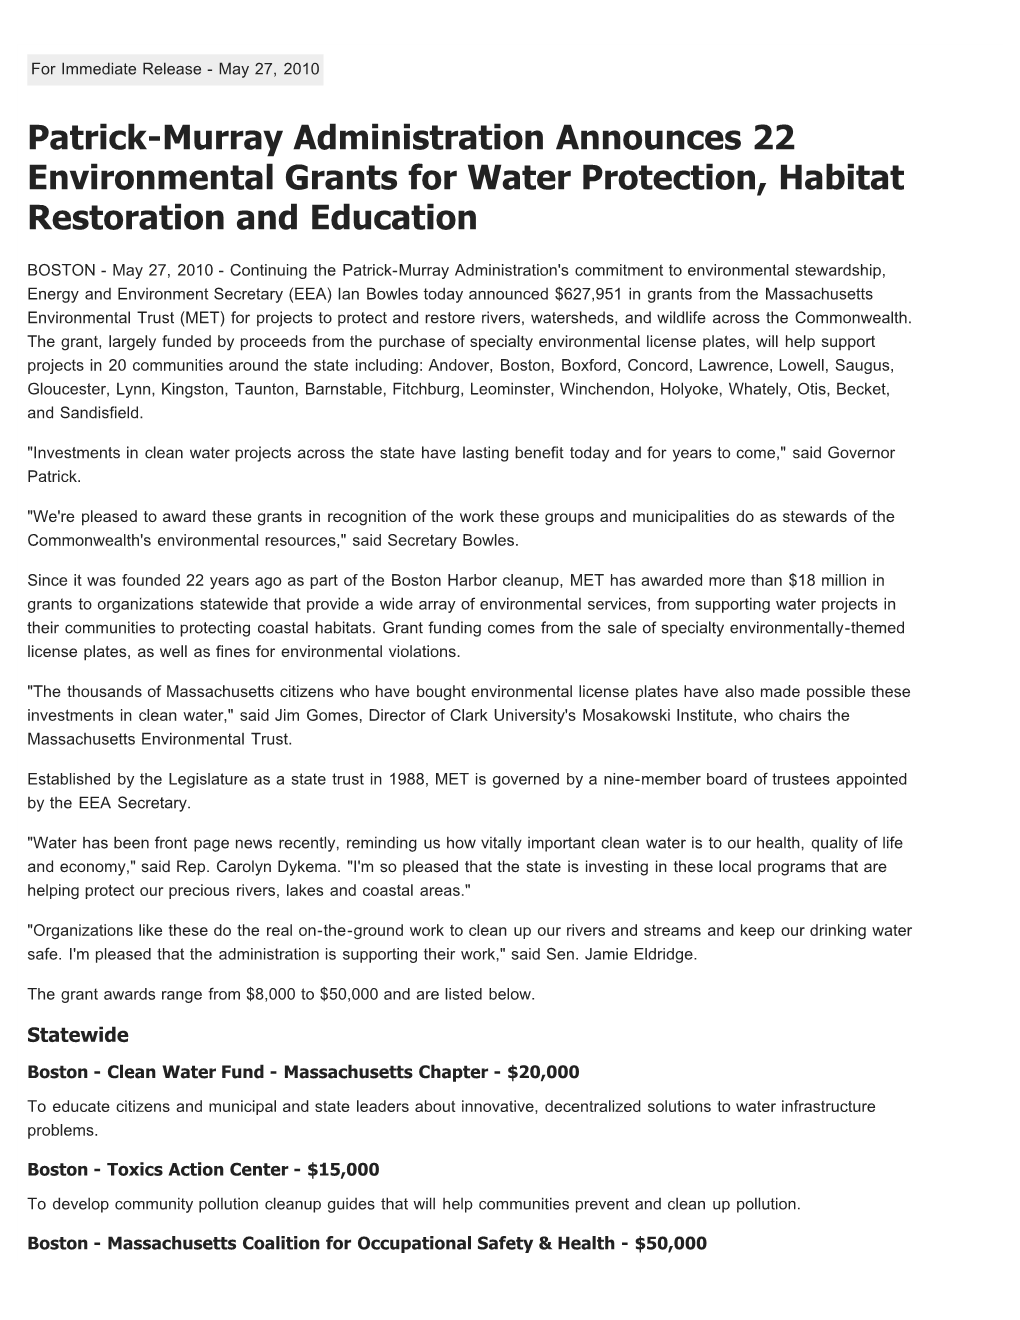 Patrick-Murray Administration Announces 22 Environmental Grants for Water Protection, Habitat Restoration and Education